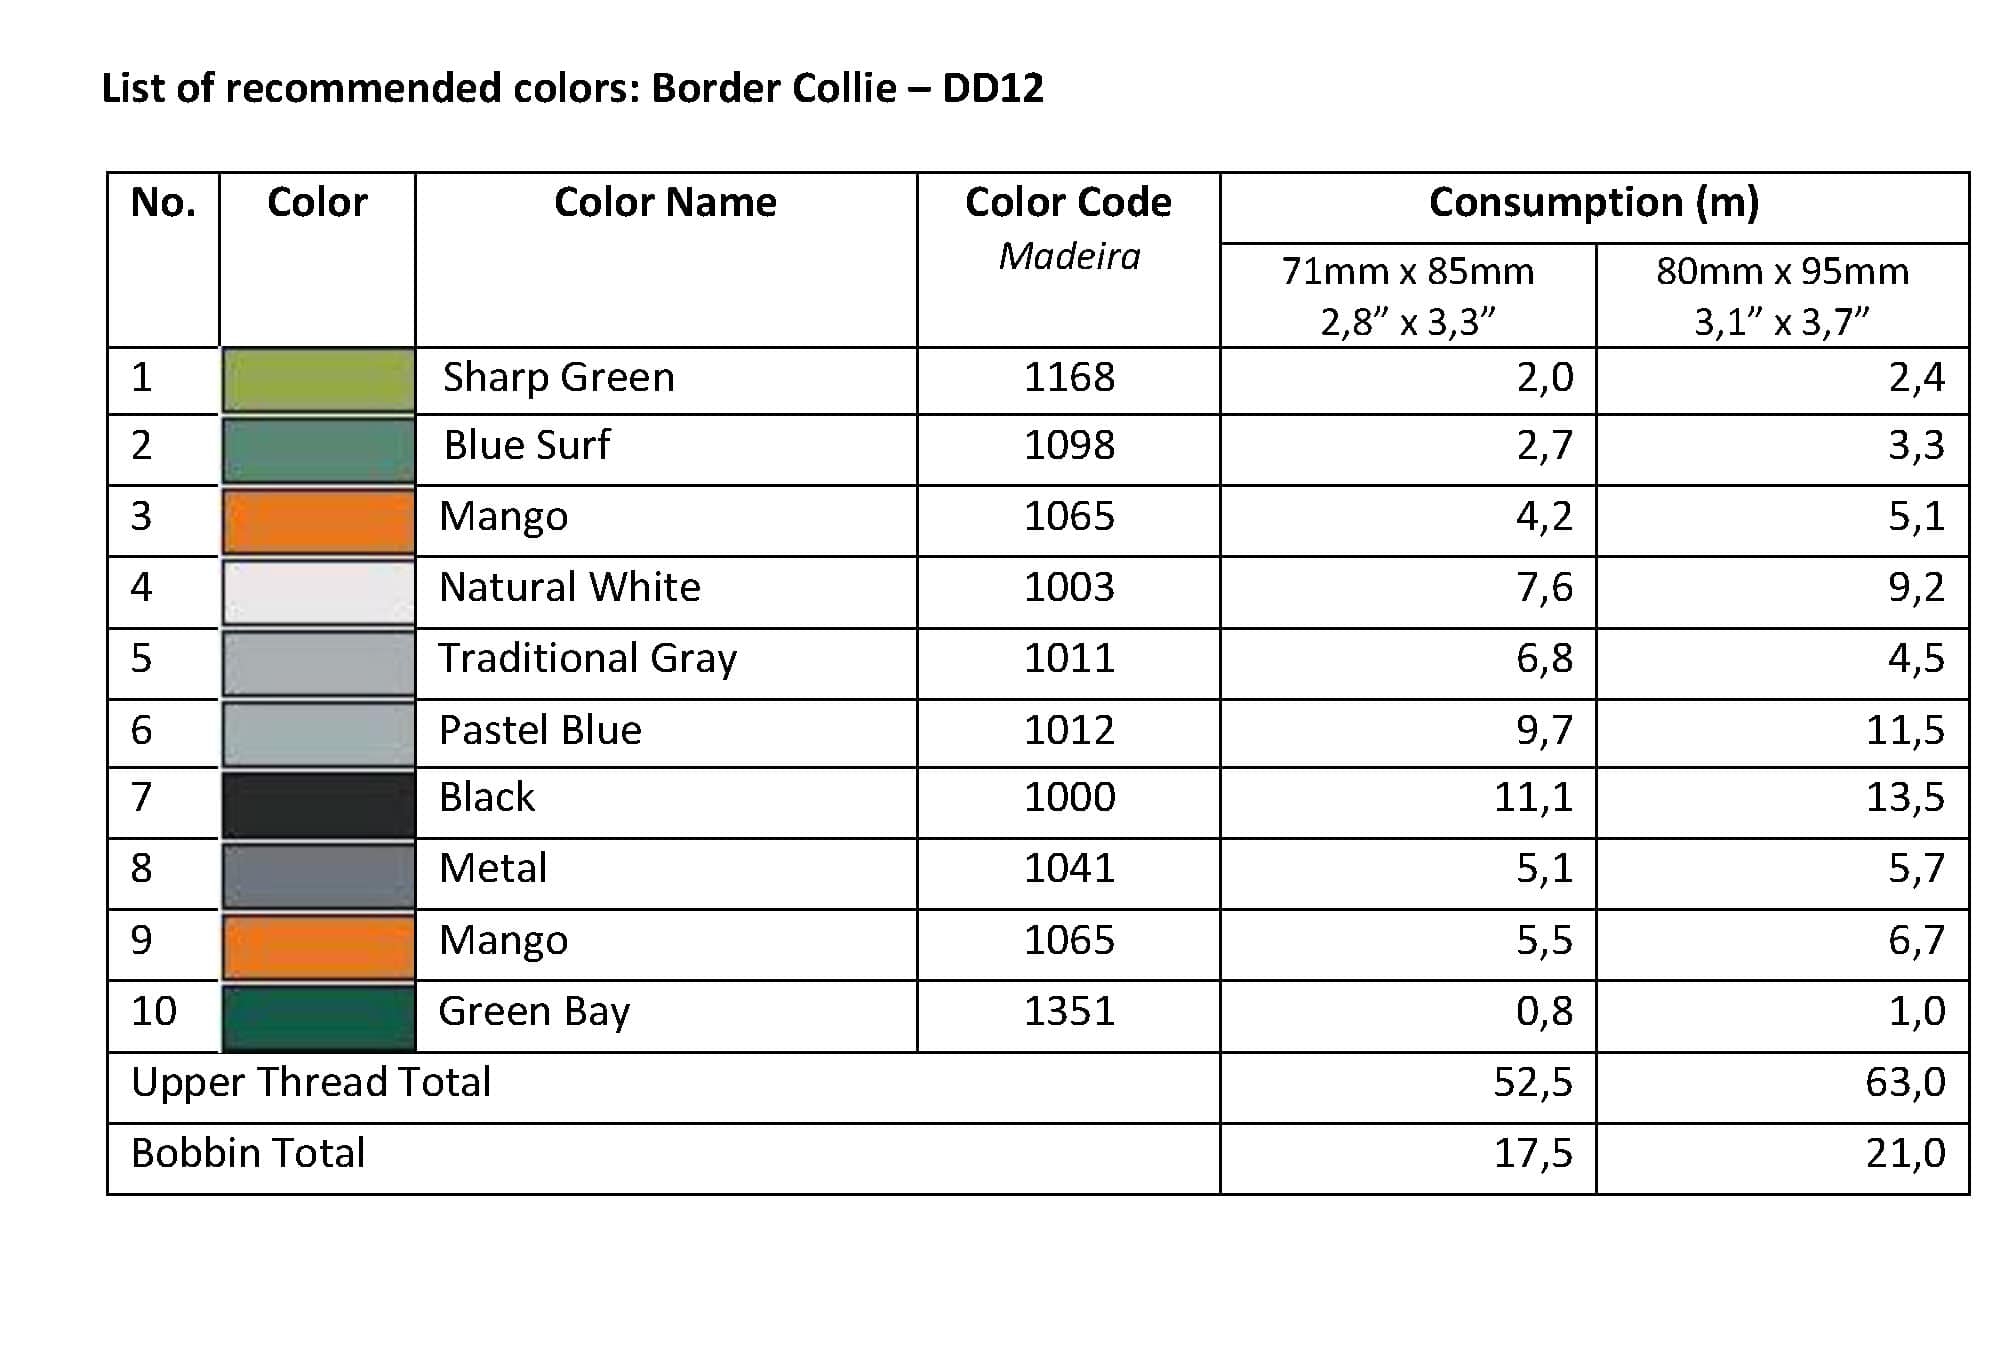 List of Recommended Colors - Border Collie DD12